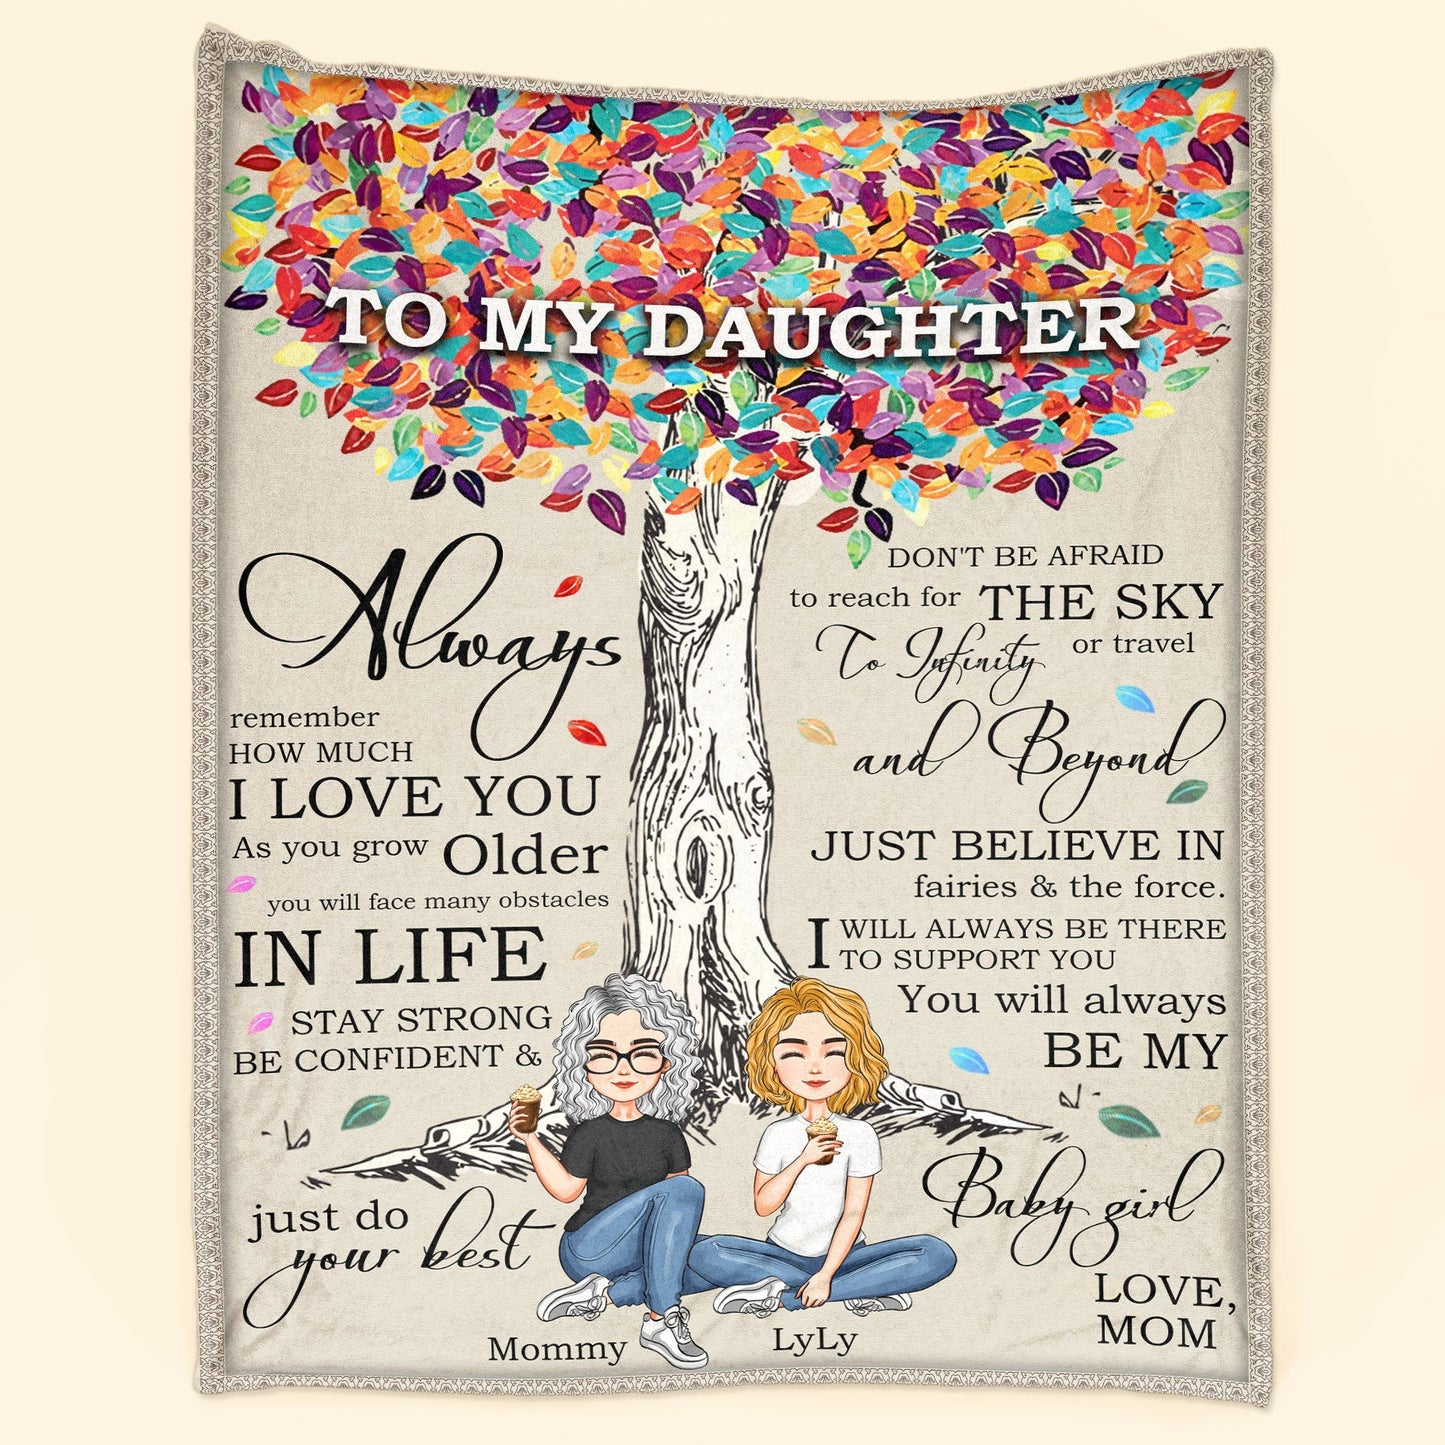 You Will Always Be My Baby Girl - Personalized Blanket - Birthday, Loving Gift For Daughters And Sons From Mom